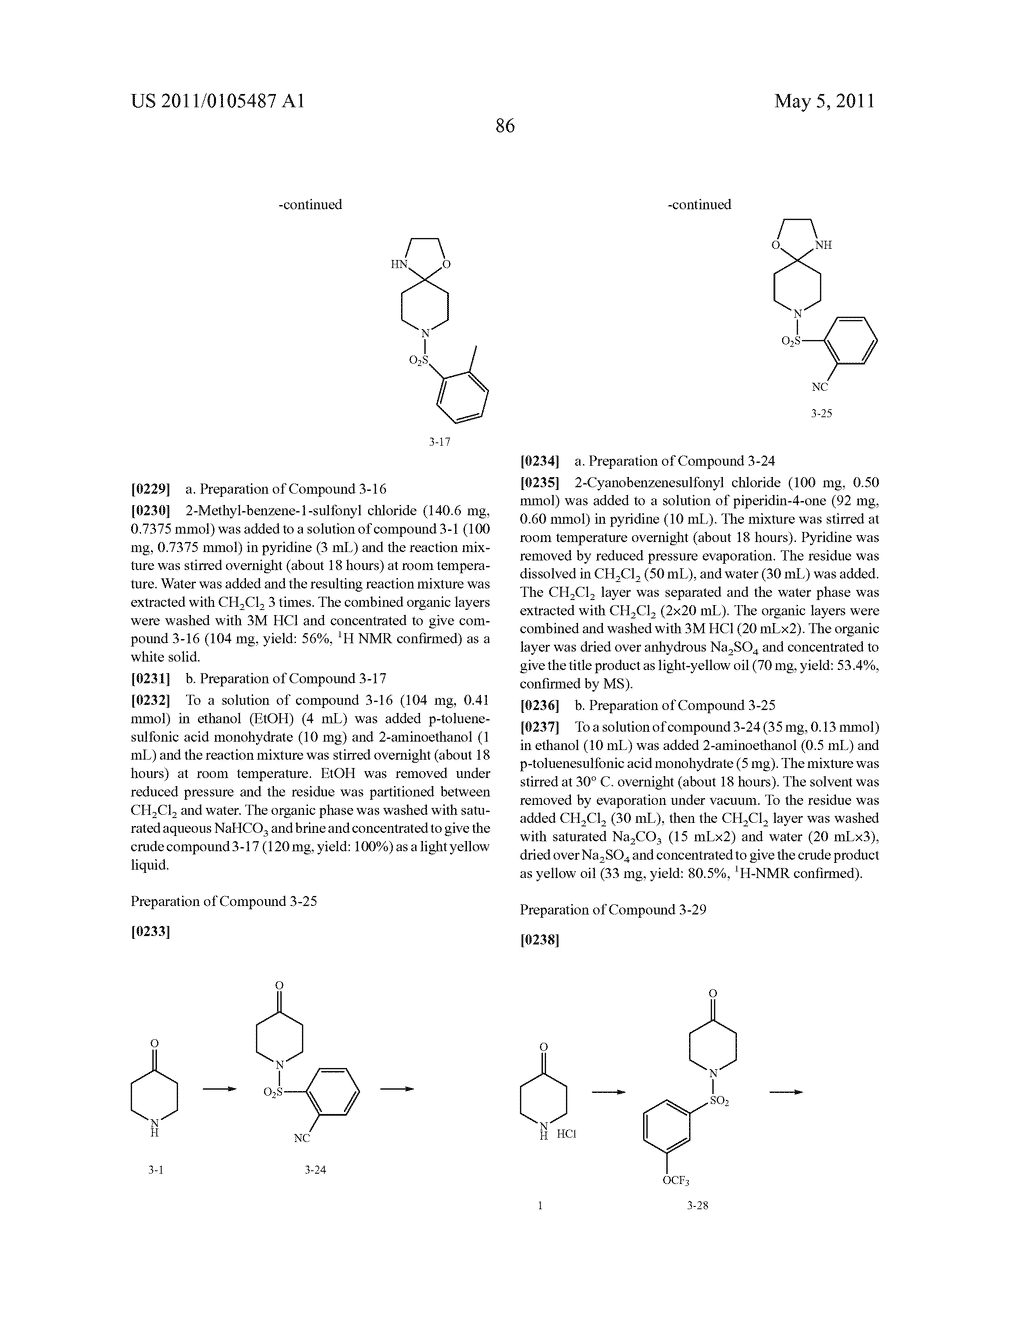 FILAMIN A BINDING ANTI-INFLAMMATORY AND ANALGESIC - diagram, schematic, and image 87